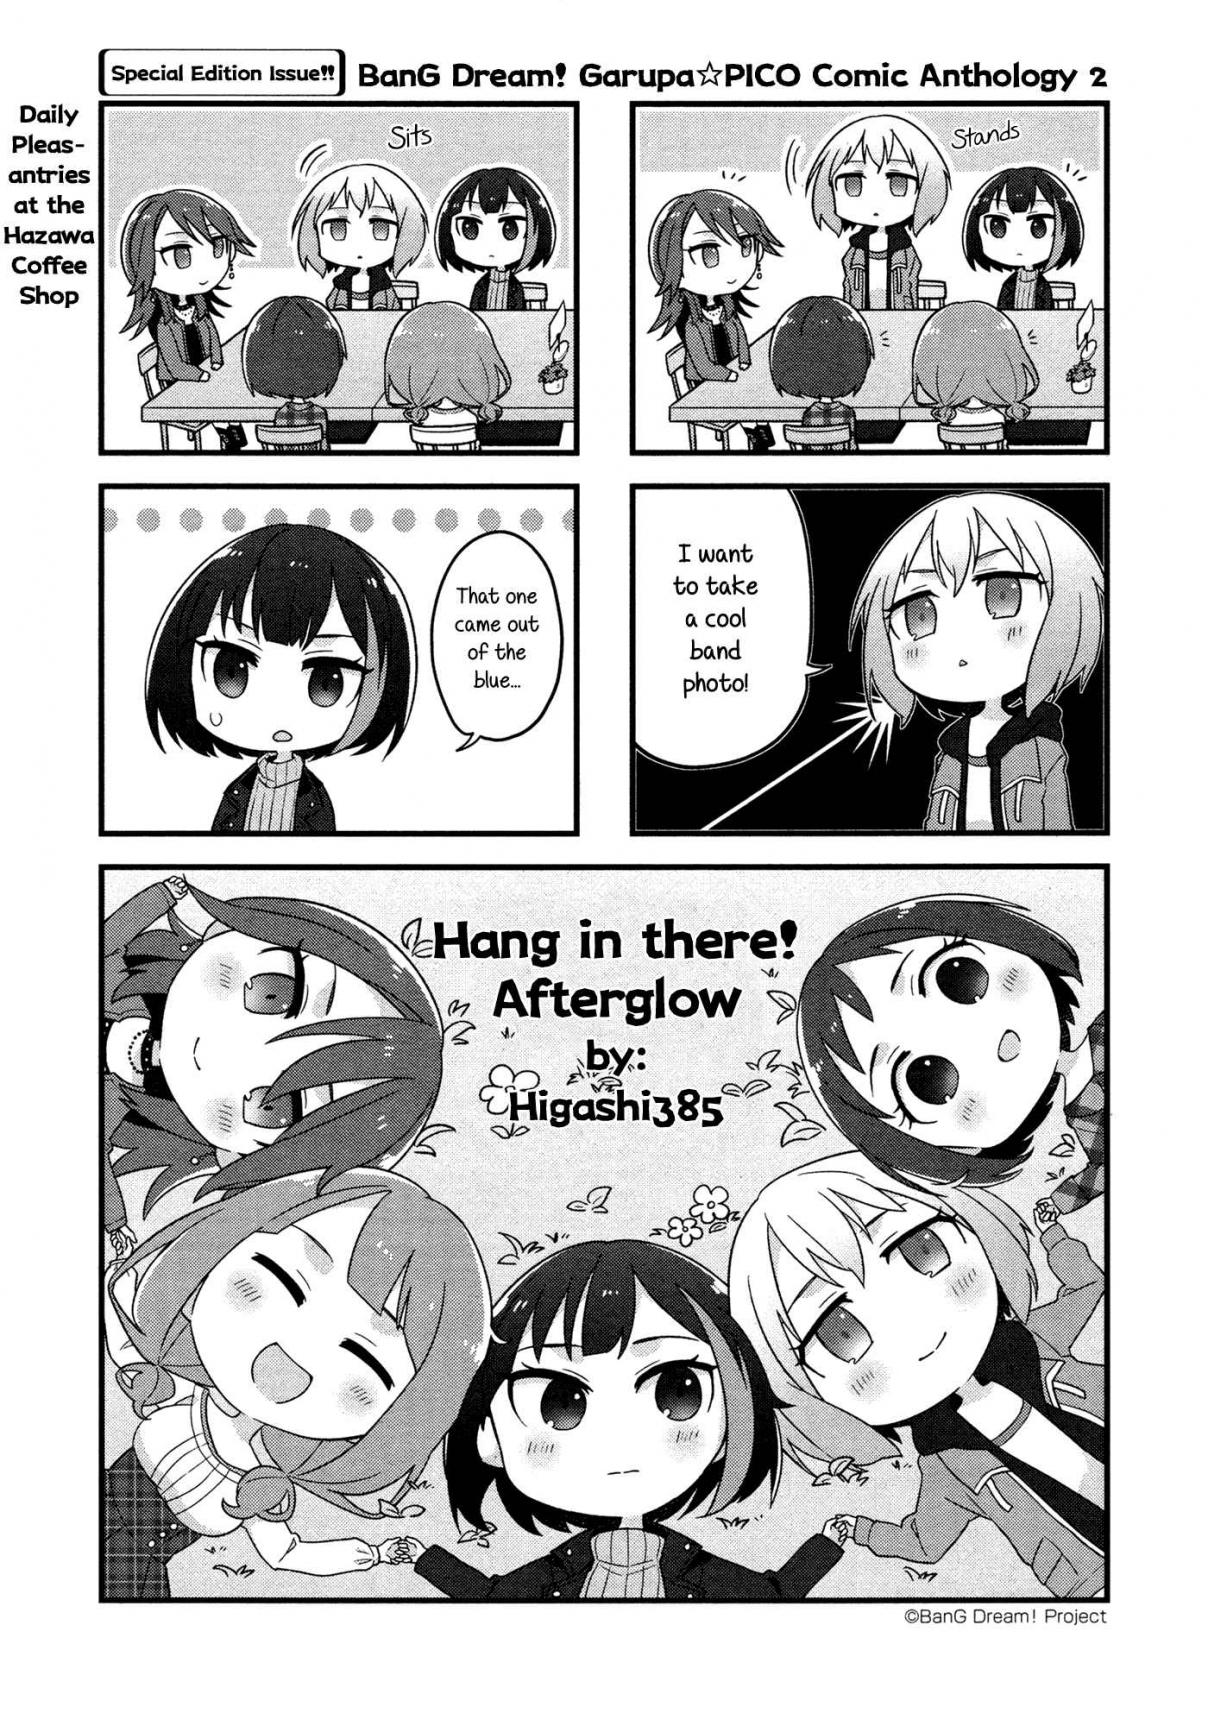 BanG Dream! Garupa☆PICO Comic Anthology Vol. 2 Ch. 20 Hang in There! Afterglow